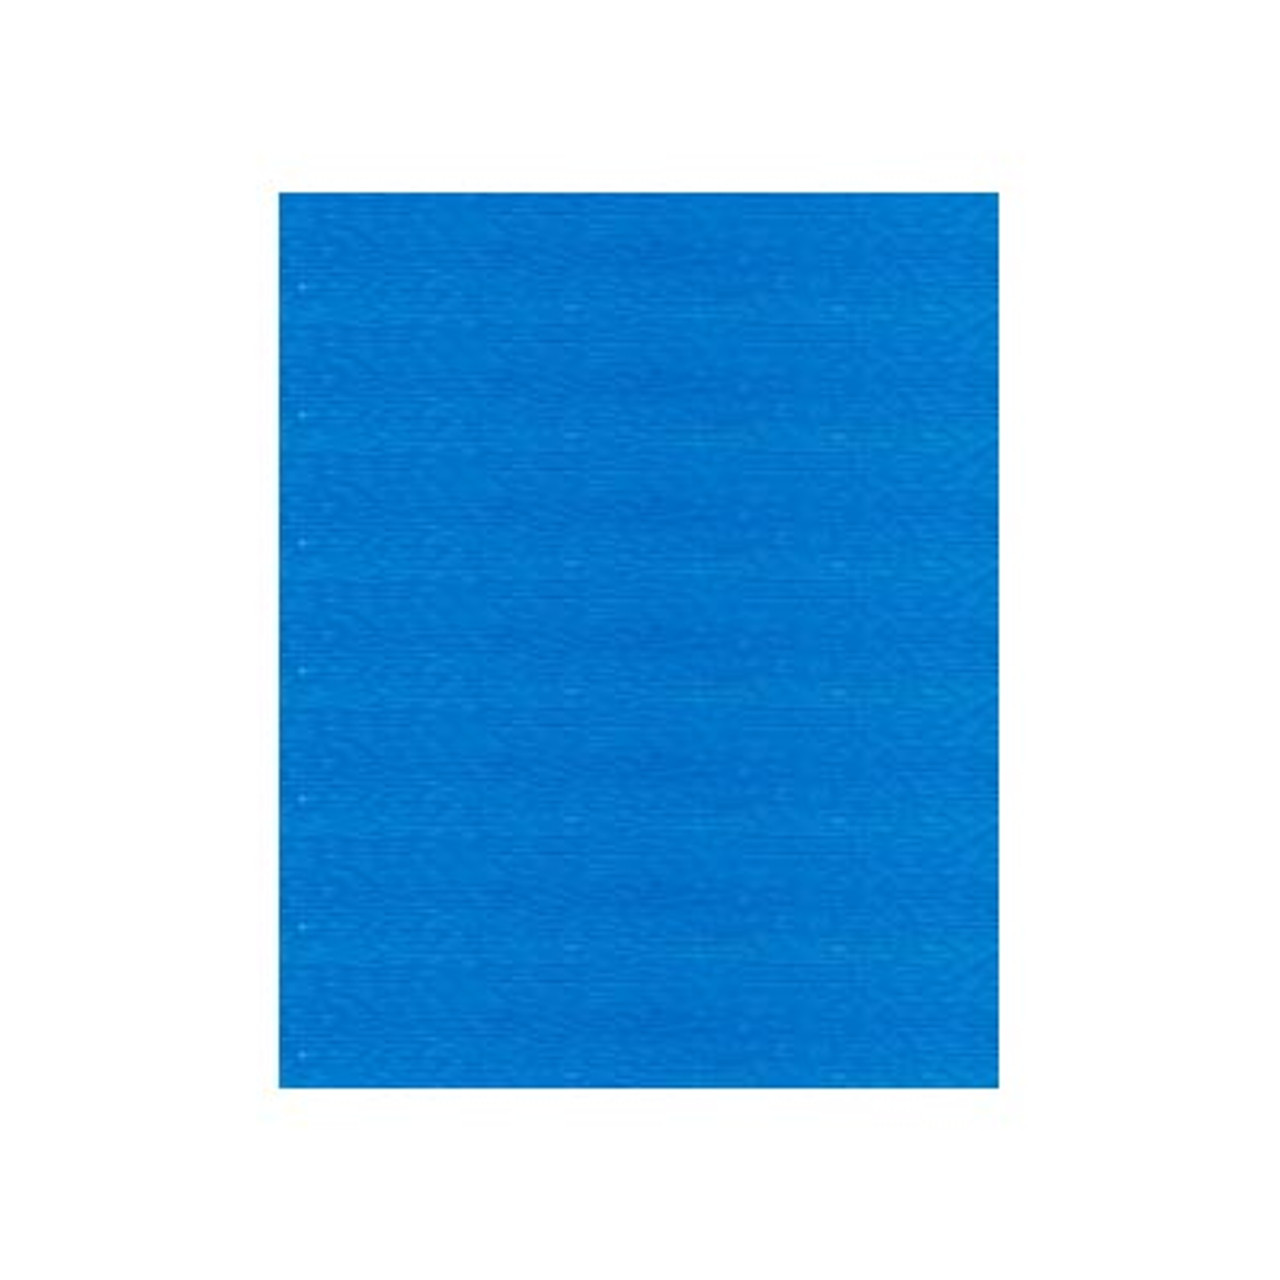 Calypso Blue Color, Classic Rayon Machine Embroidery Thread, (#40 Weig –  Blanks for Crafters